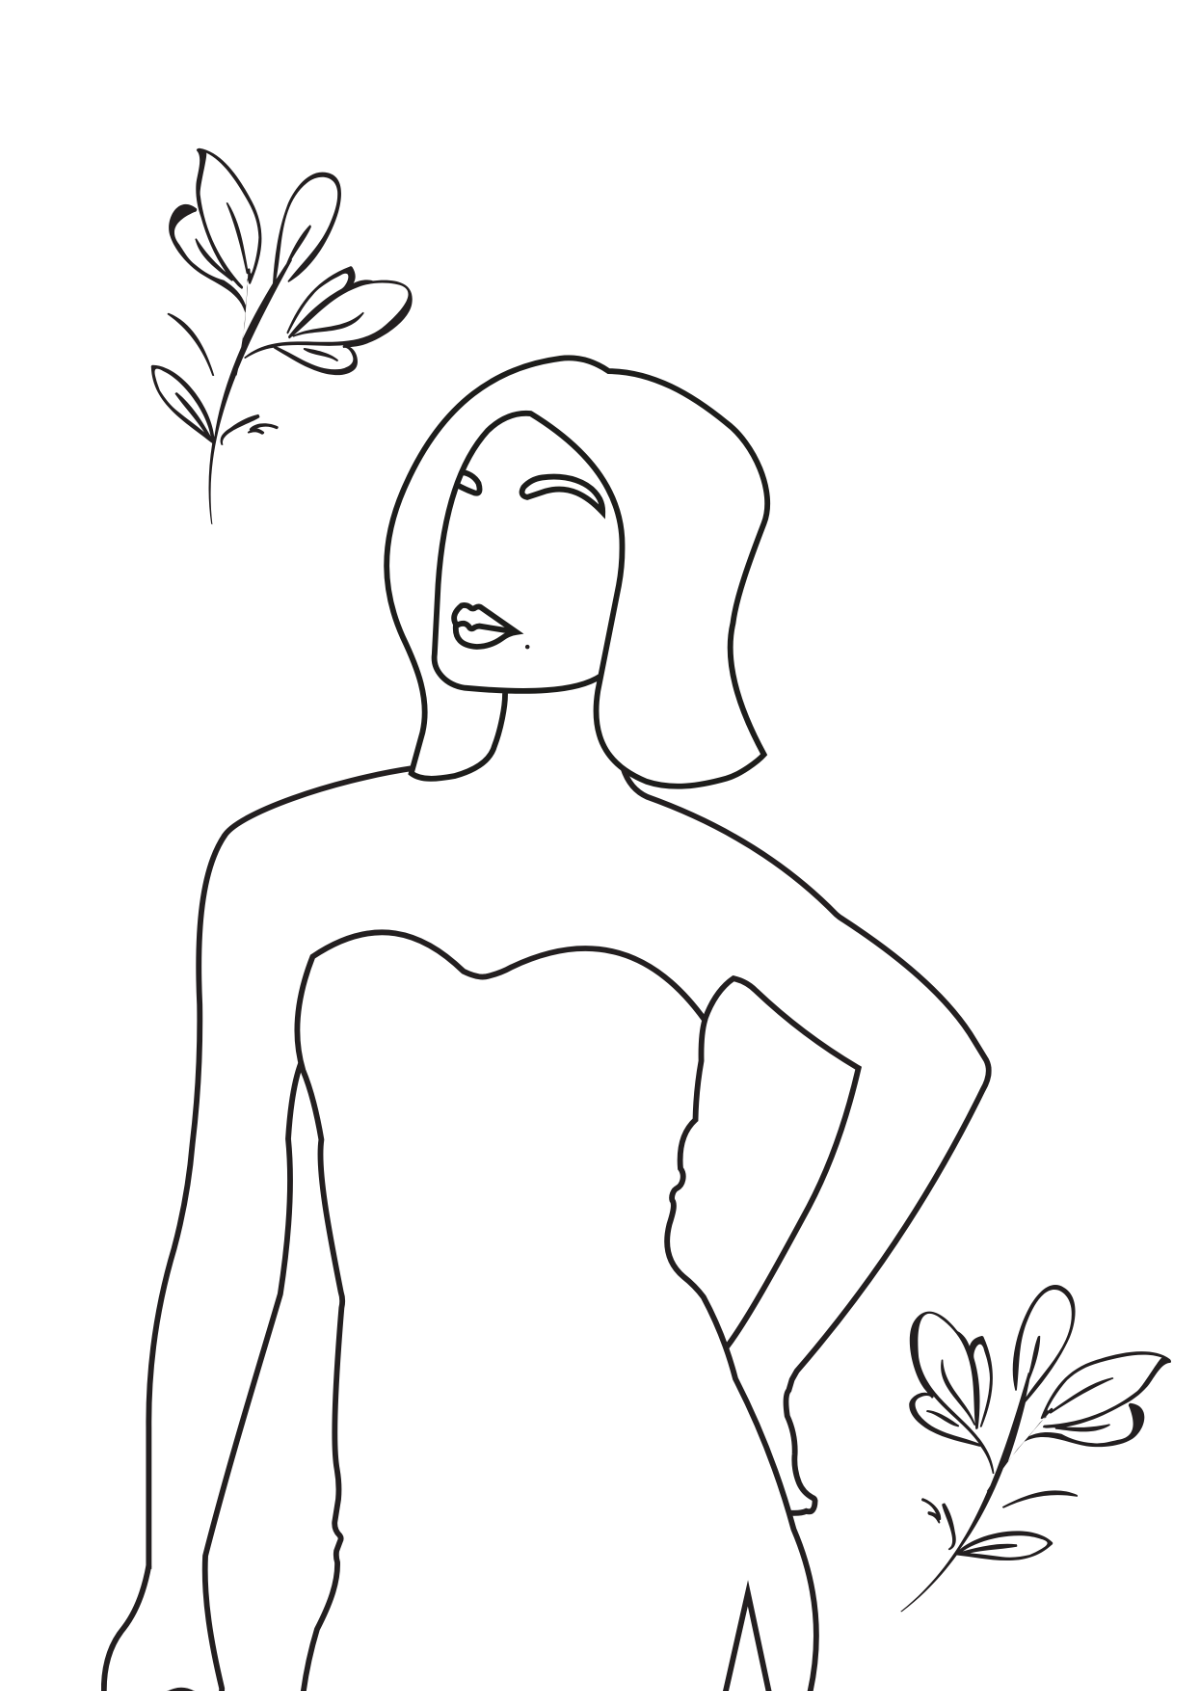 Happy International Women's Day Drawing Template